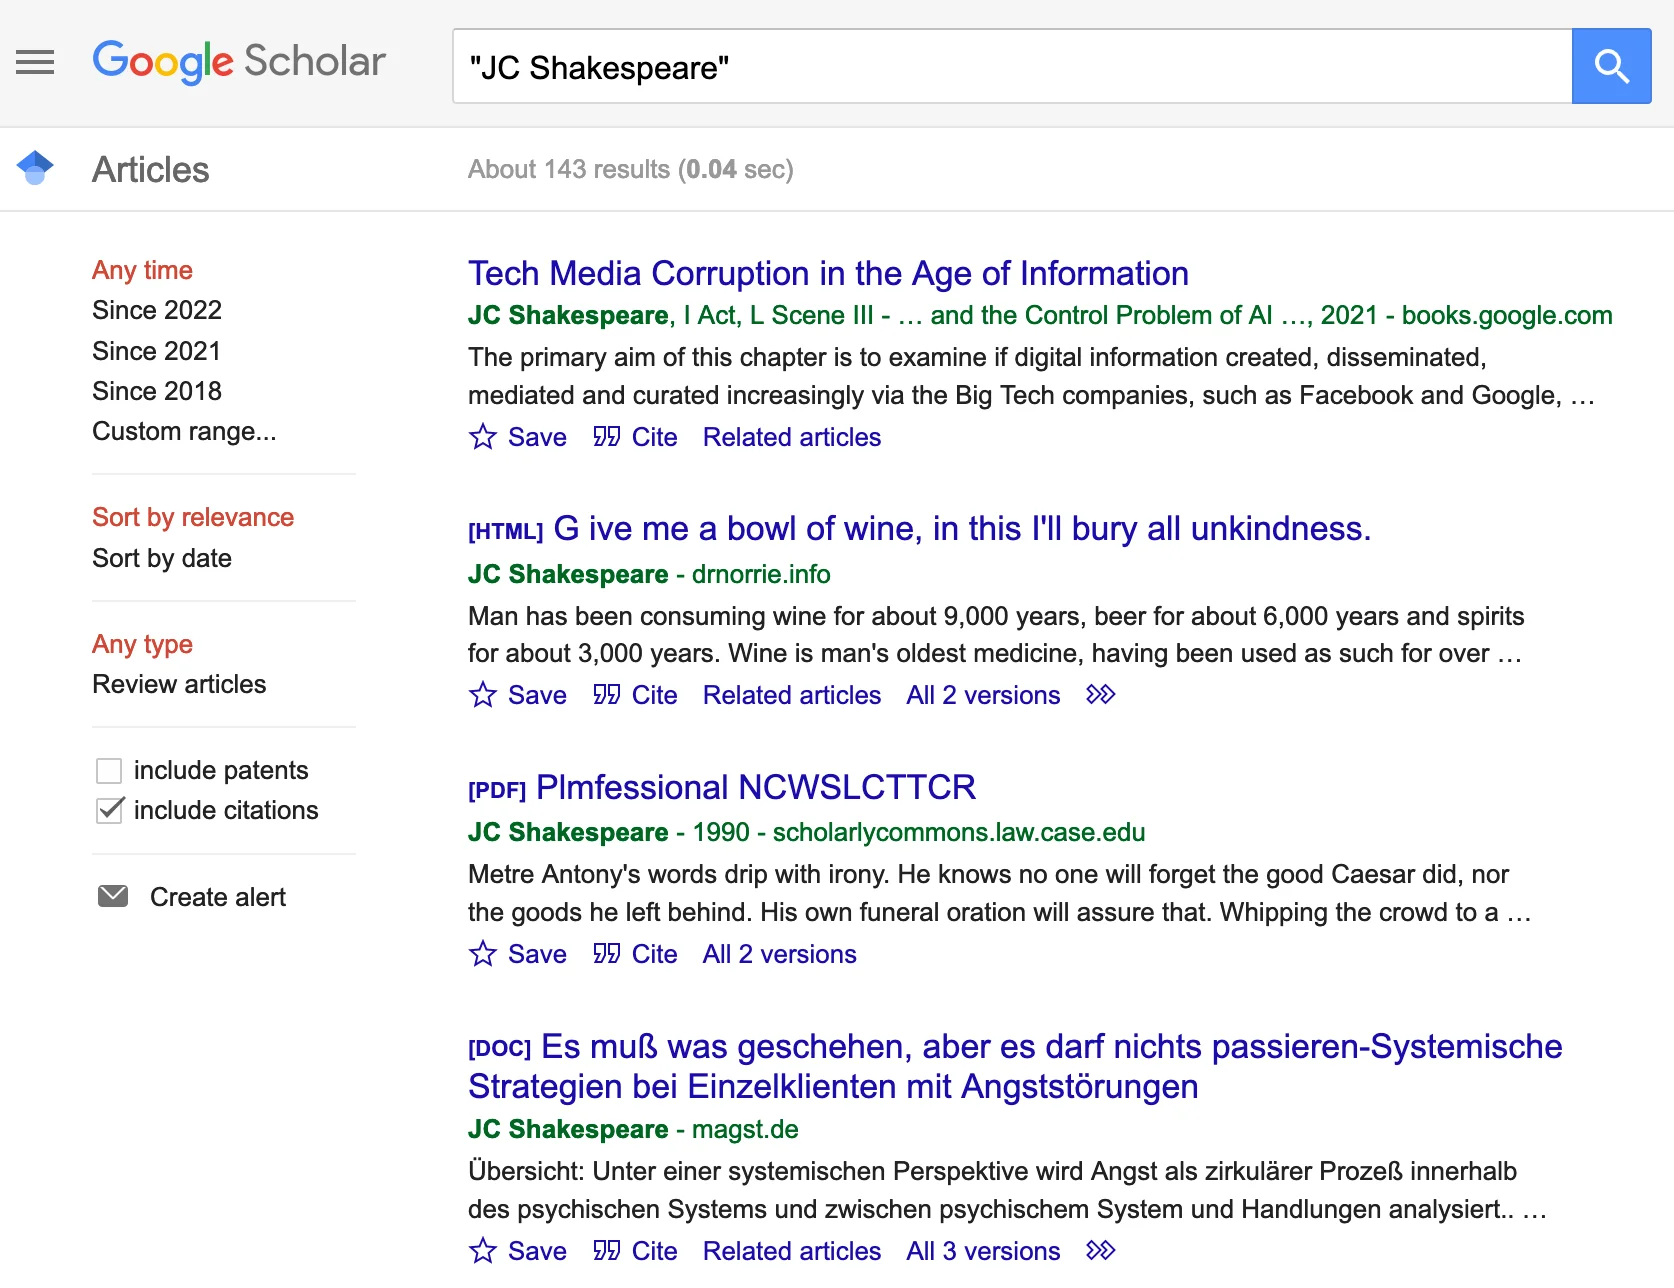 Screenshot of Google Scholar results. Shakespeare has, apparently, written about law, technology, wine, and an article in German.